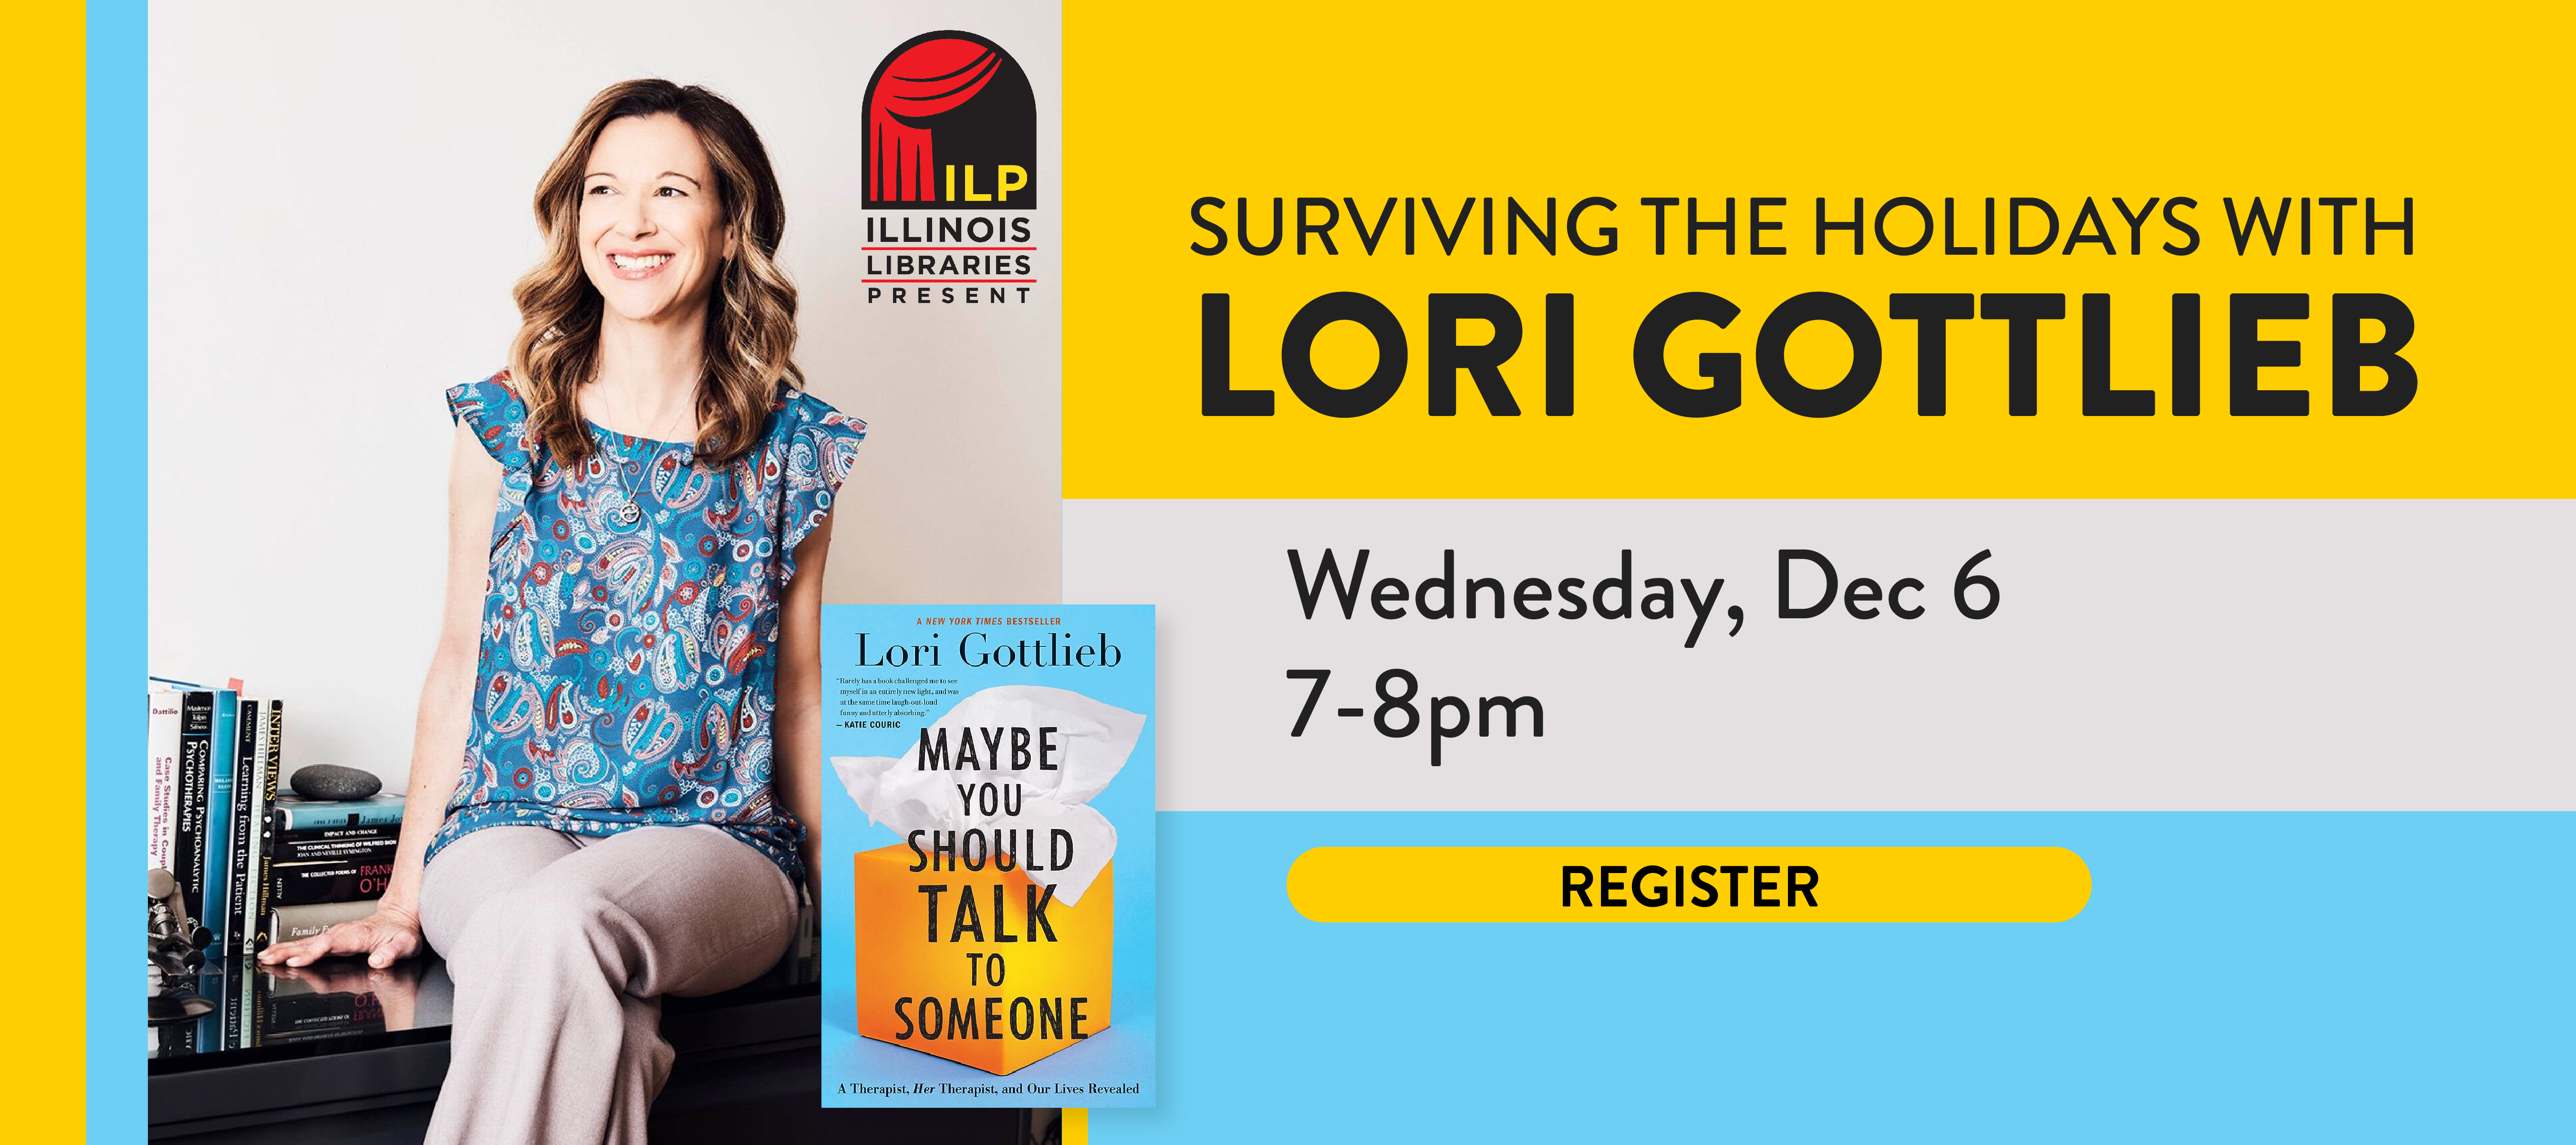 phpl, prospect heights public library, SURVIVING THE HOLIDAYS WITH LORI GOTTLIEB